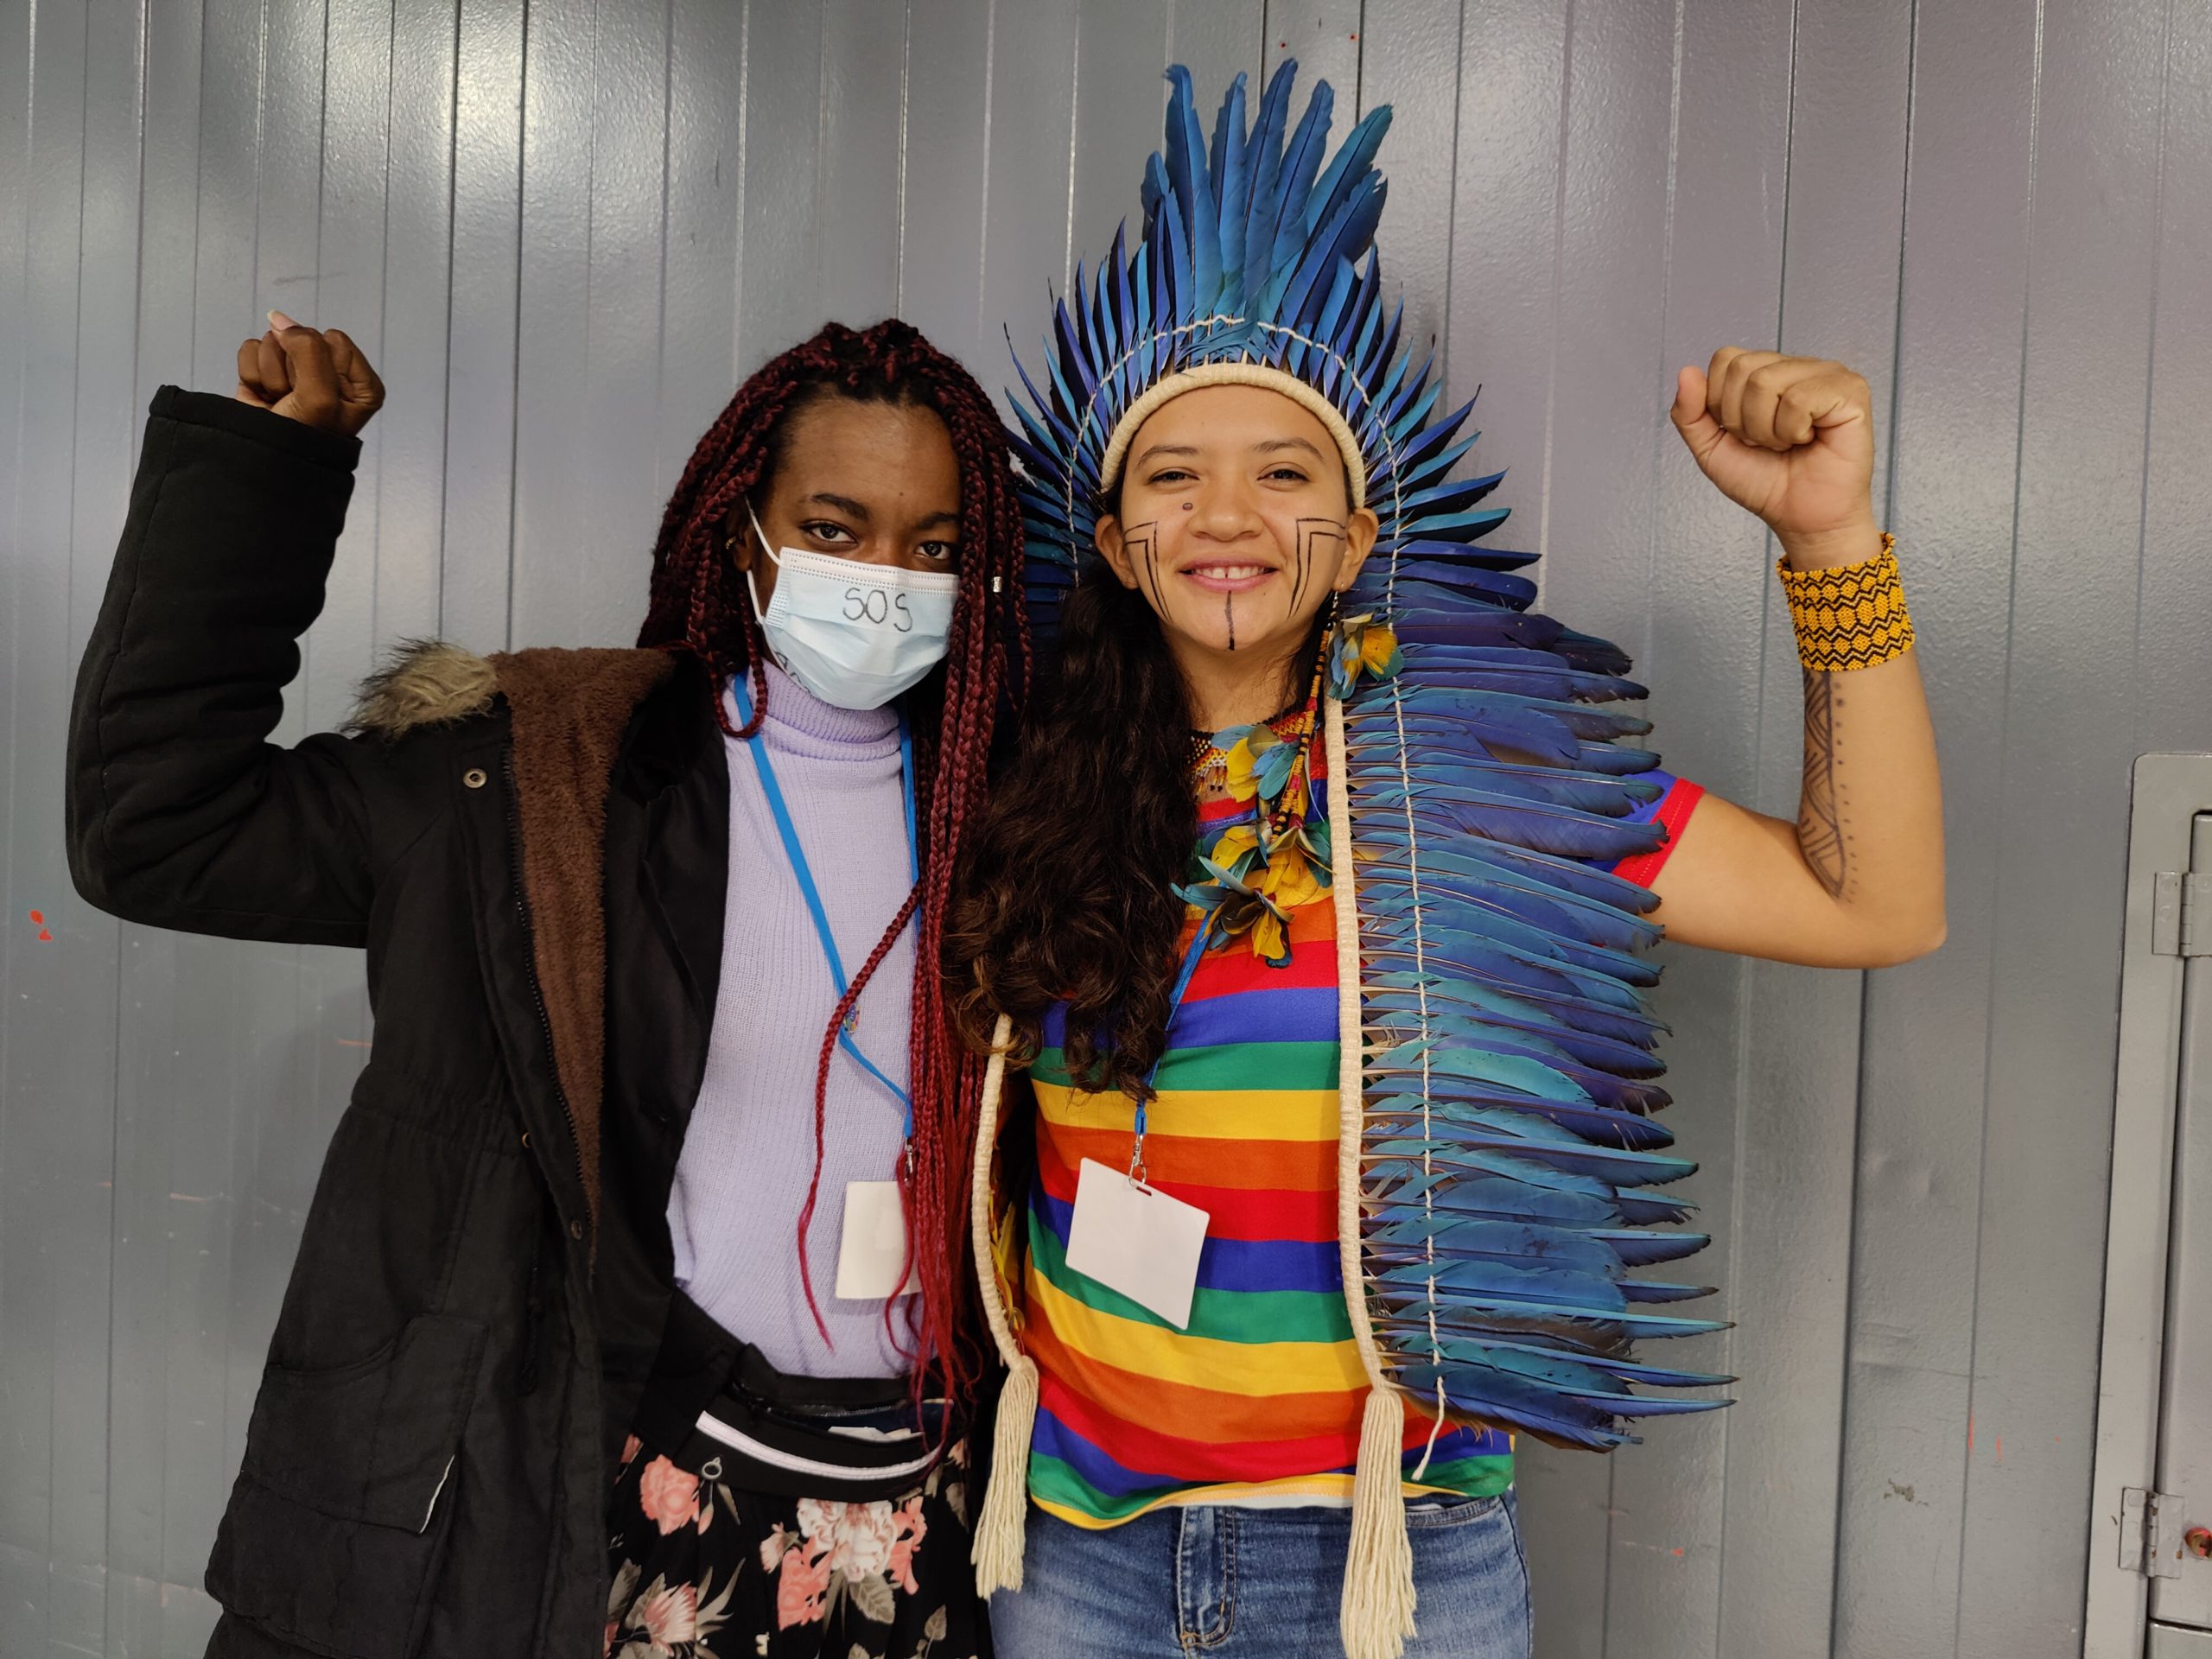 Youth at COP26. Isvilaine da Silva Conceicao (left) and Jaciara Beatriz Sousa de Vasconcelos from Brazil said that the high costs of attending a COP in a developed country meant that a lot of indigenous voices were left out. (Image: Disha Shetty)